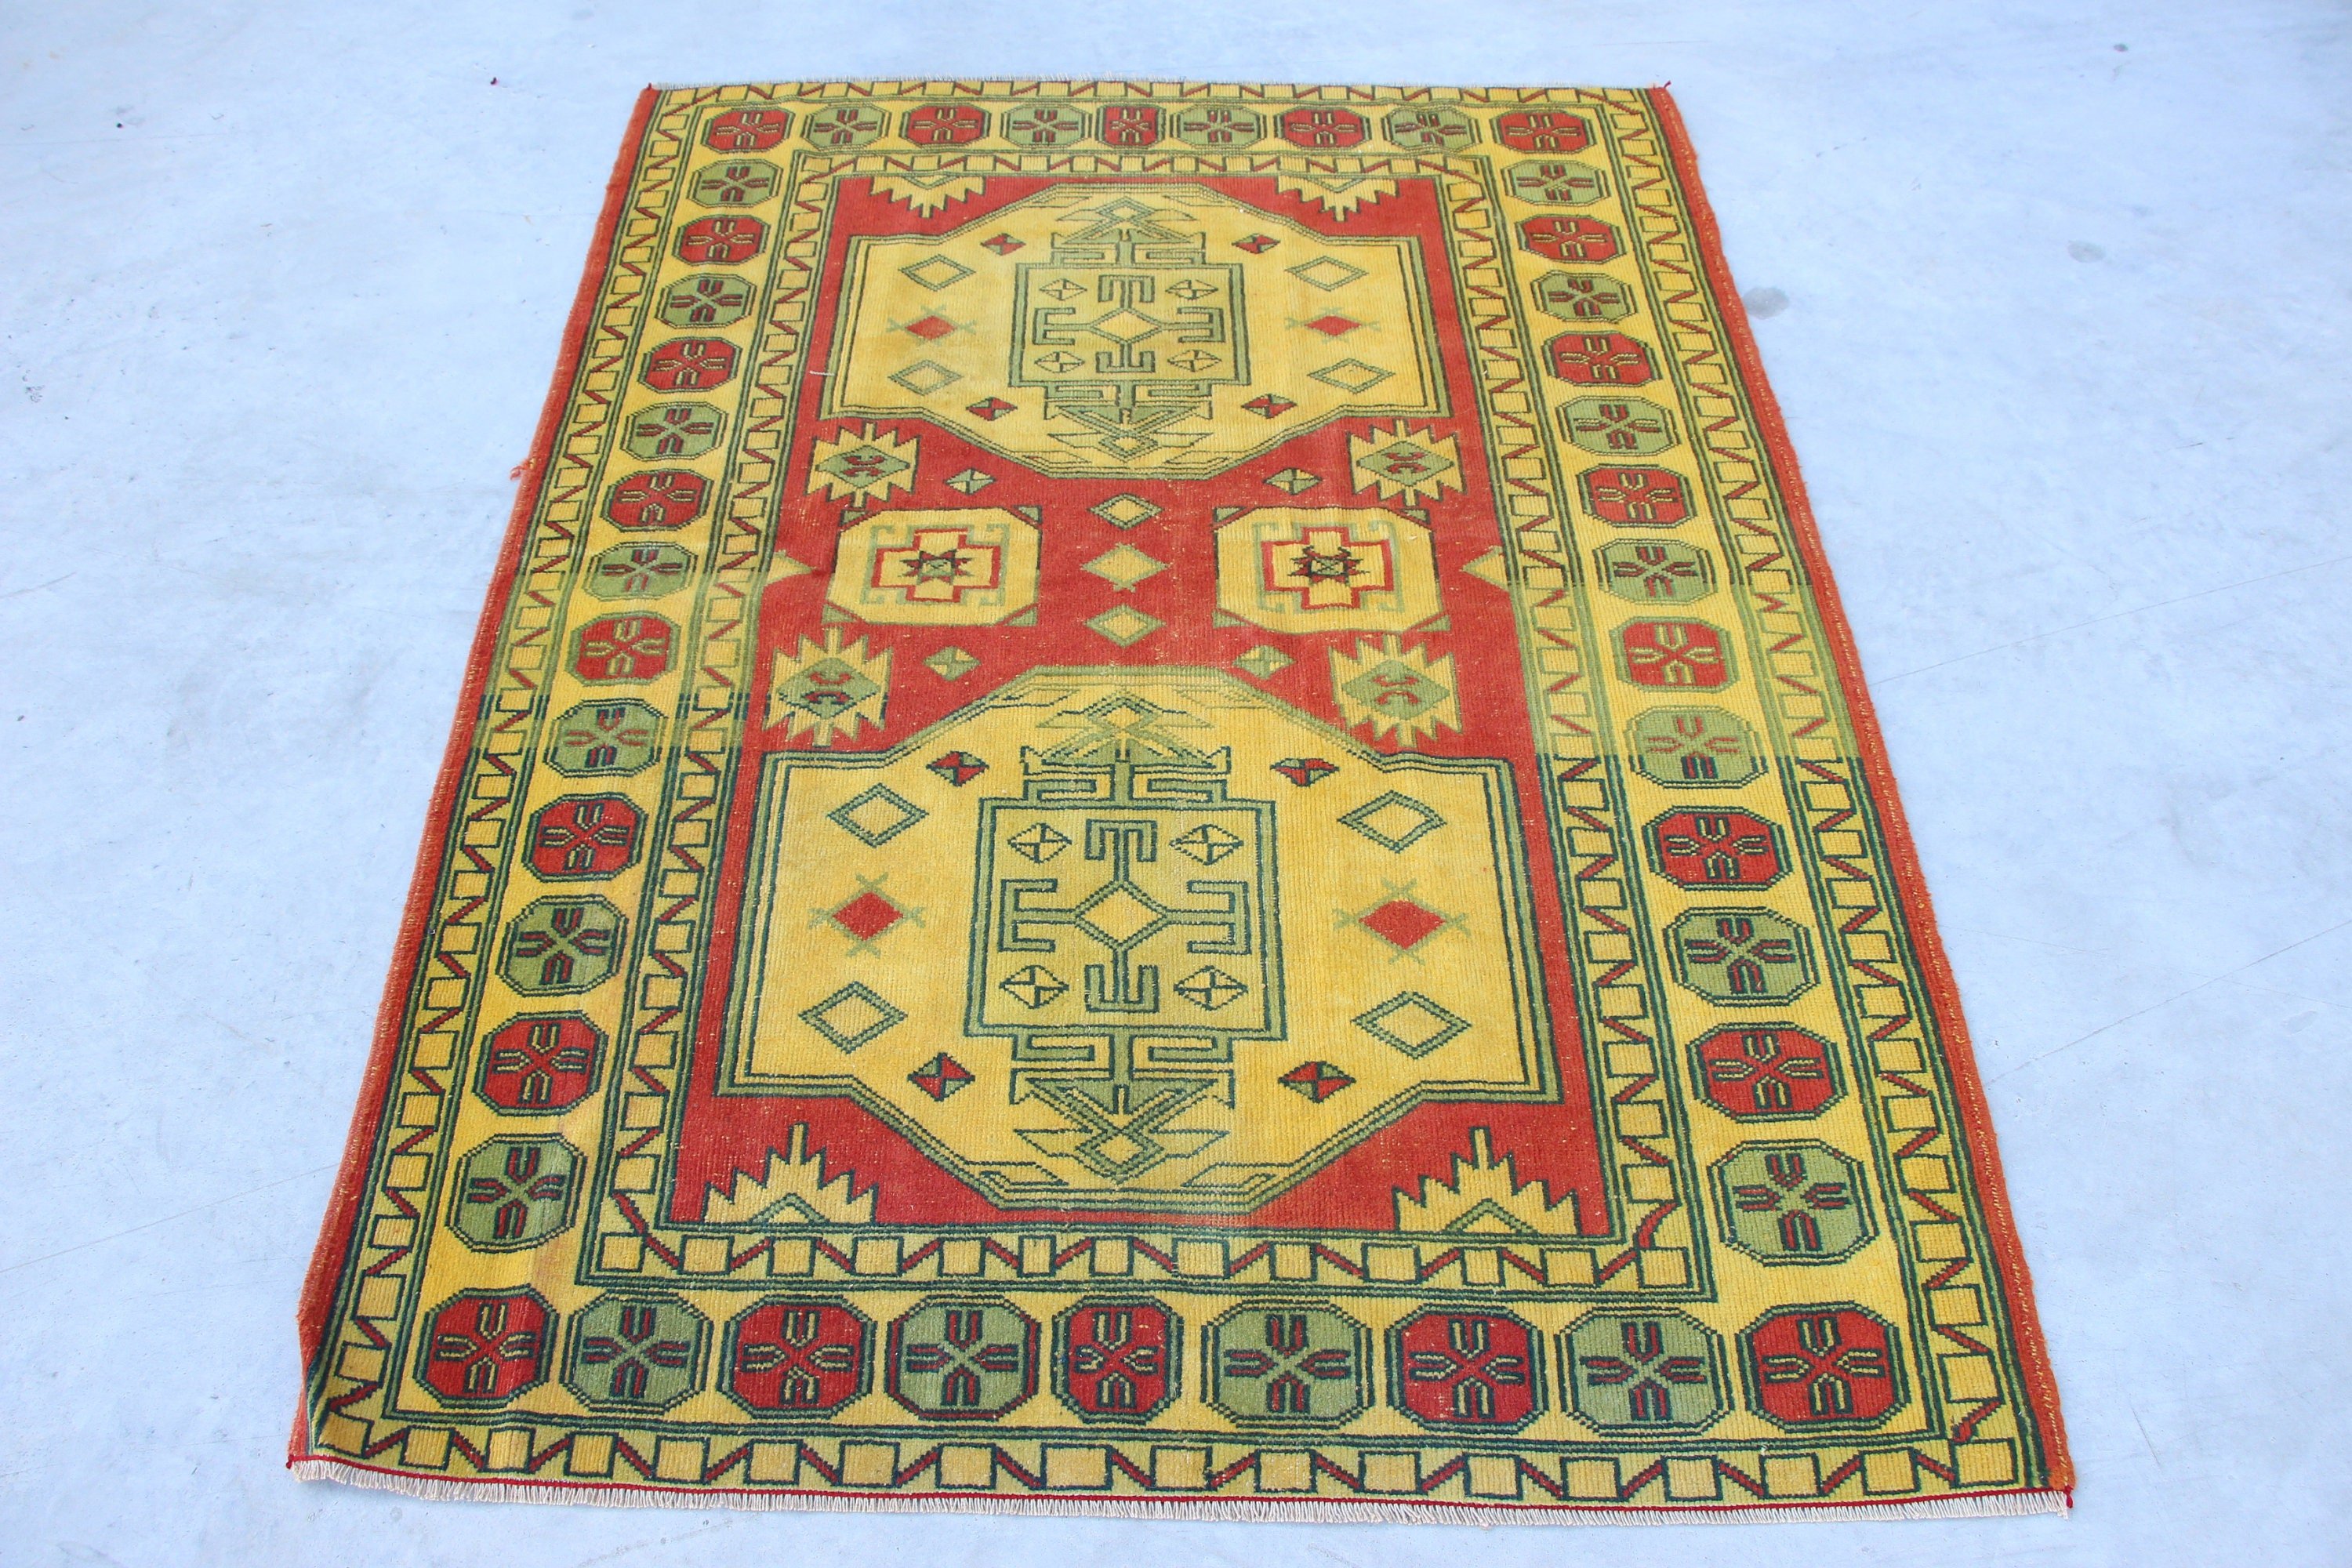 Kitchen Rug, Floor Rugs, Turkish Rug, Pastel Rug, 4x5.3 ft Accent Rug, Yellow Bedroom Rugs, Vintage Rug, Entry Rug, Rugs for Entry, Art Rug